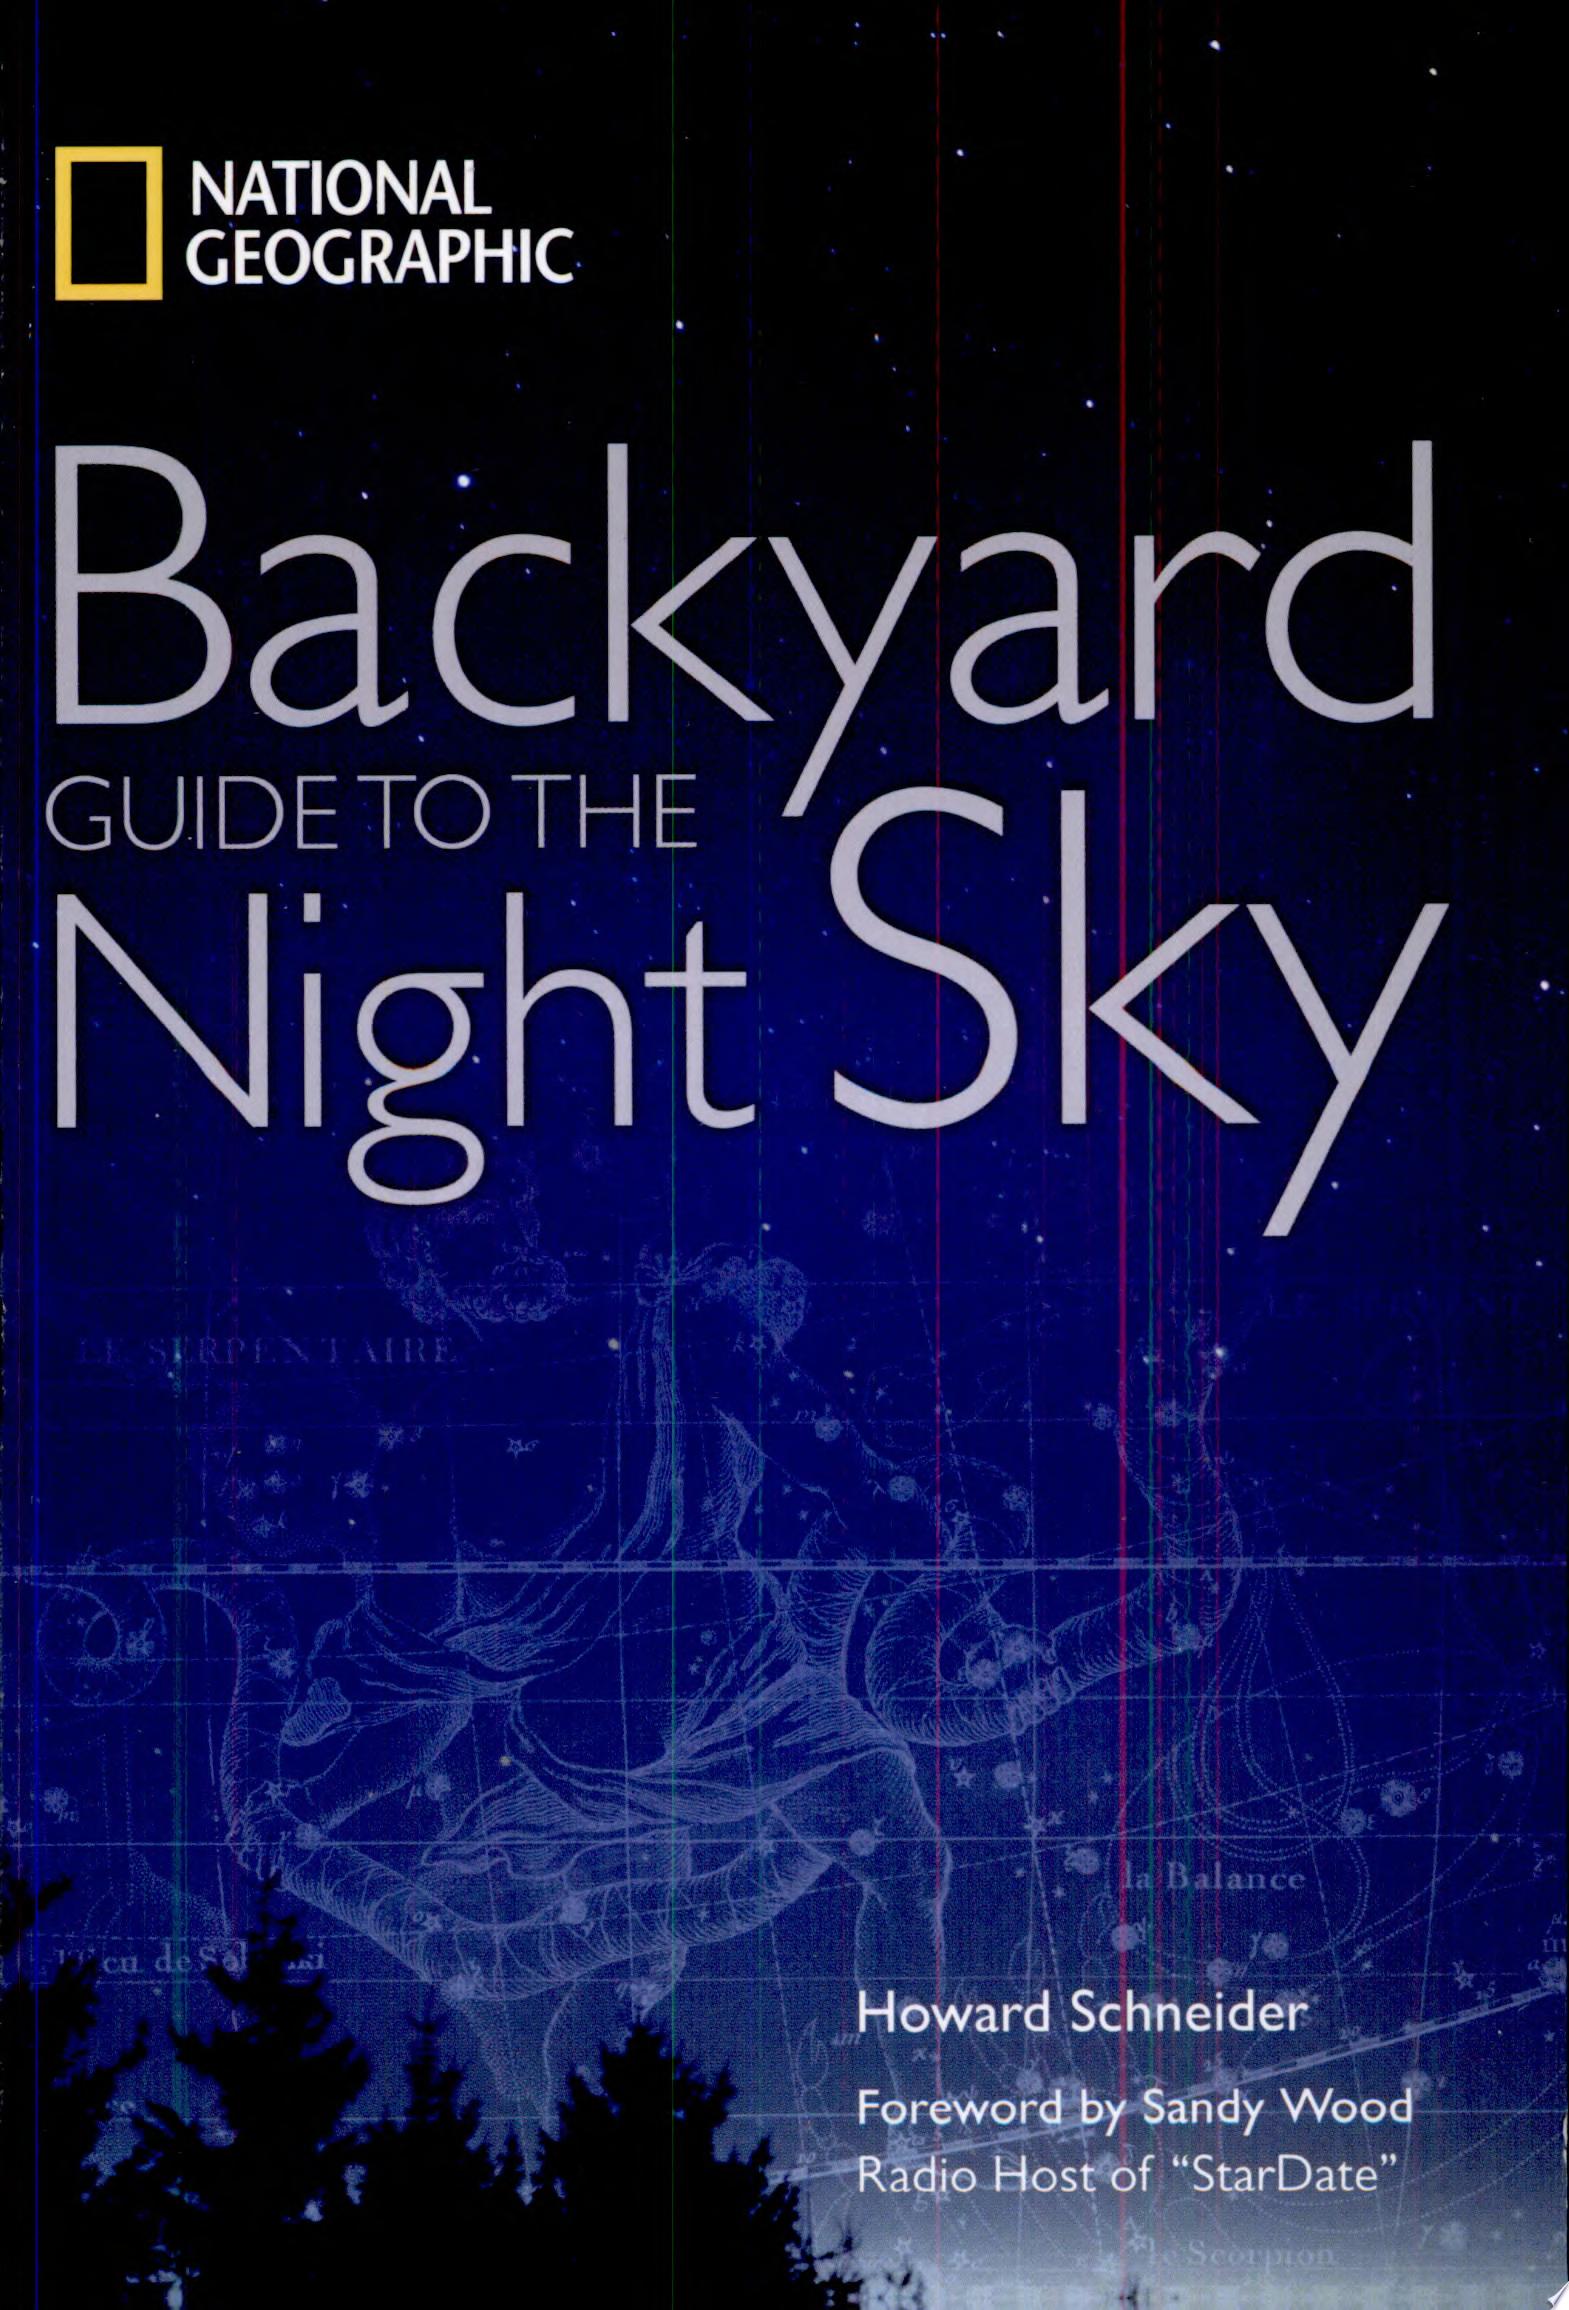 Image for "Backyard Guide to the Night Sky"